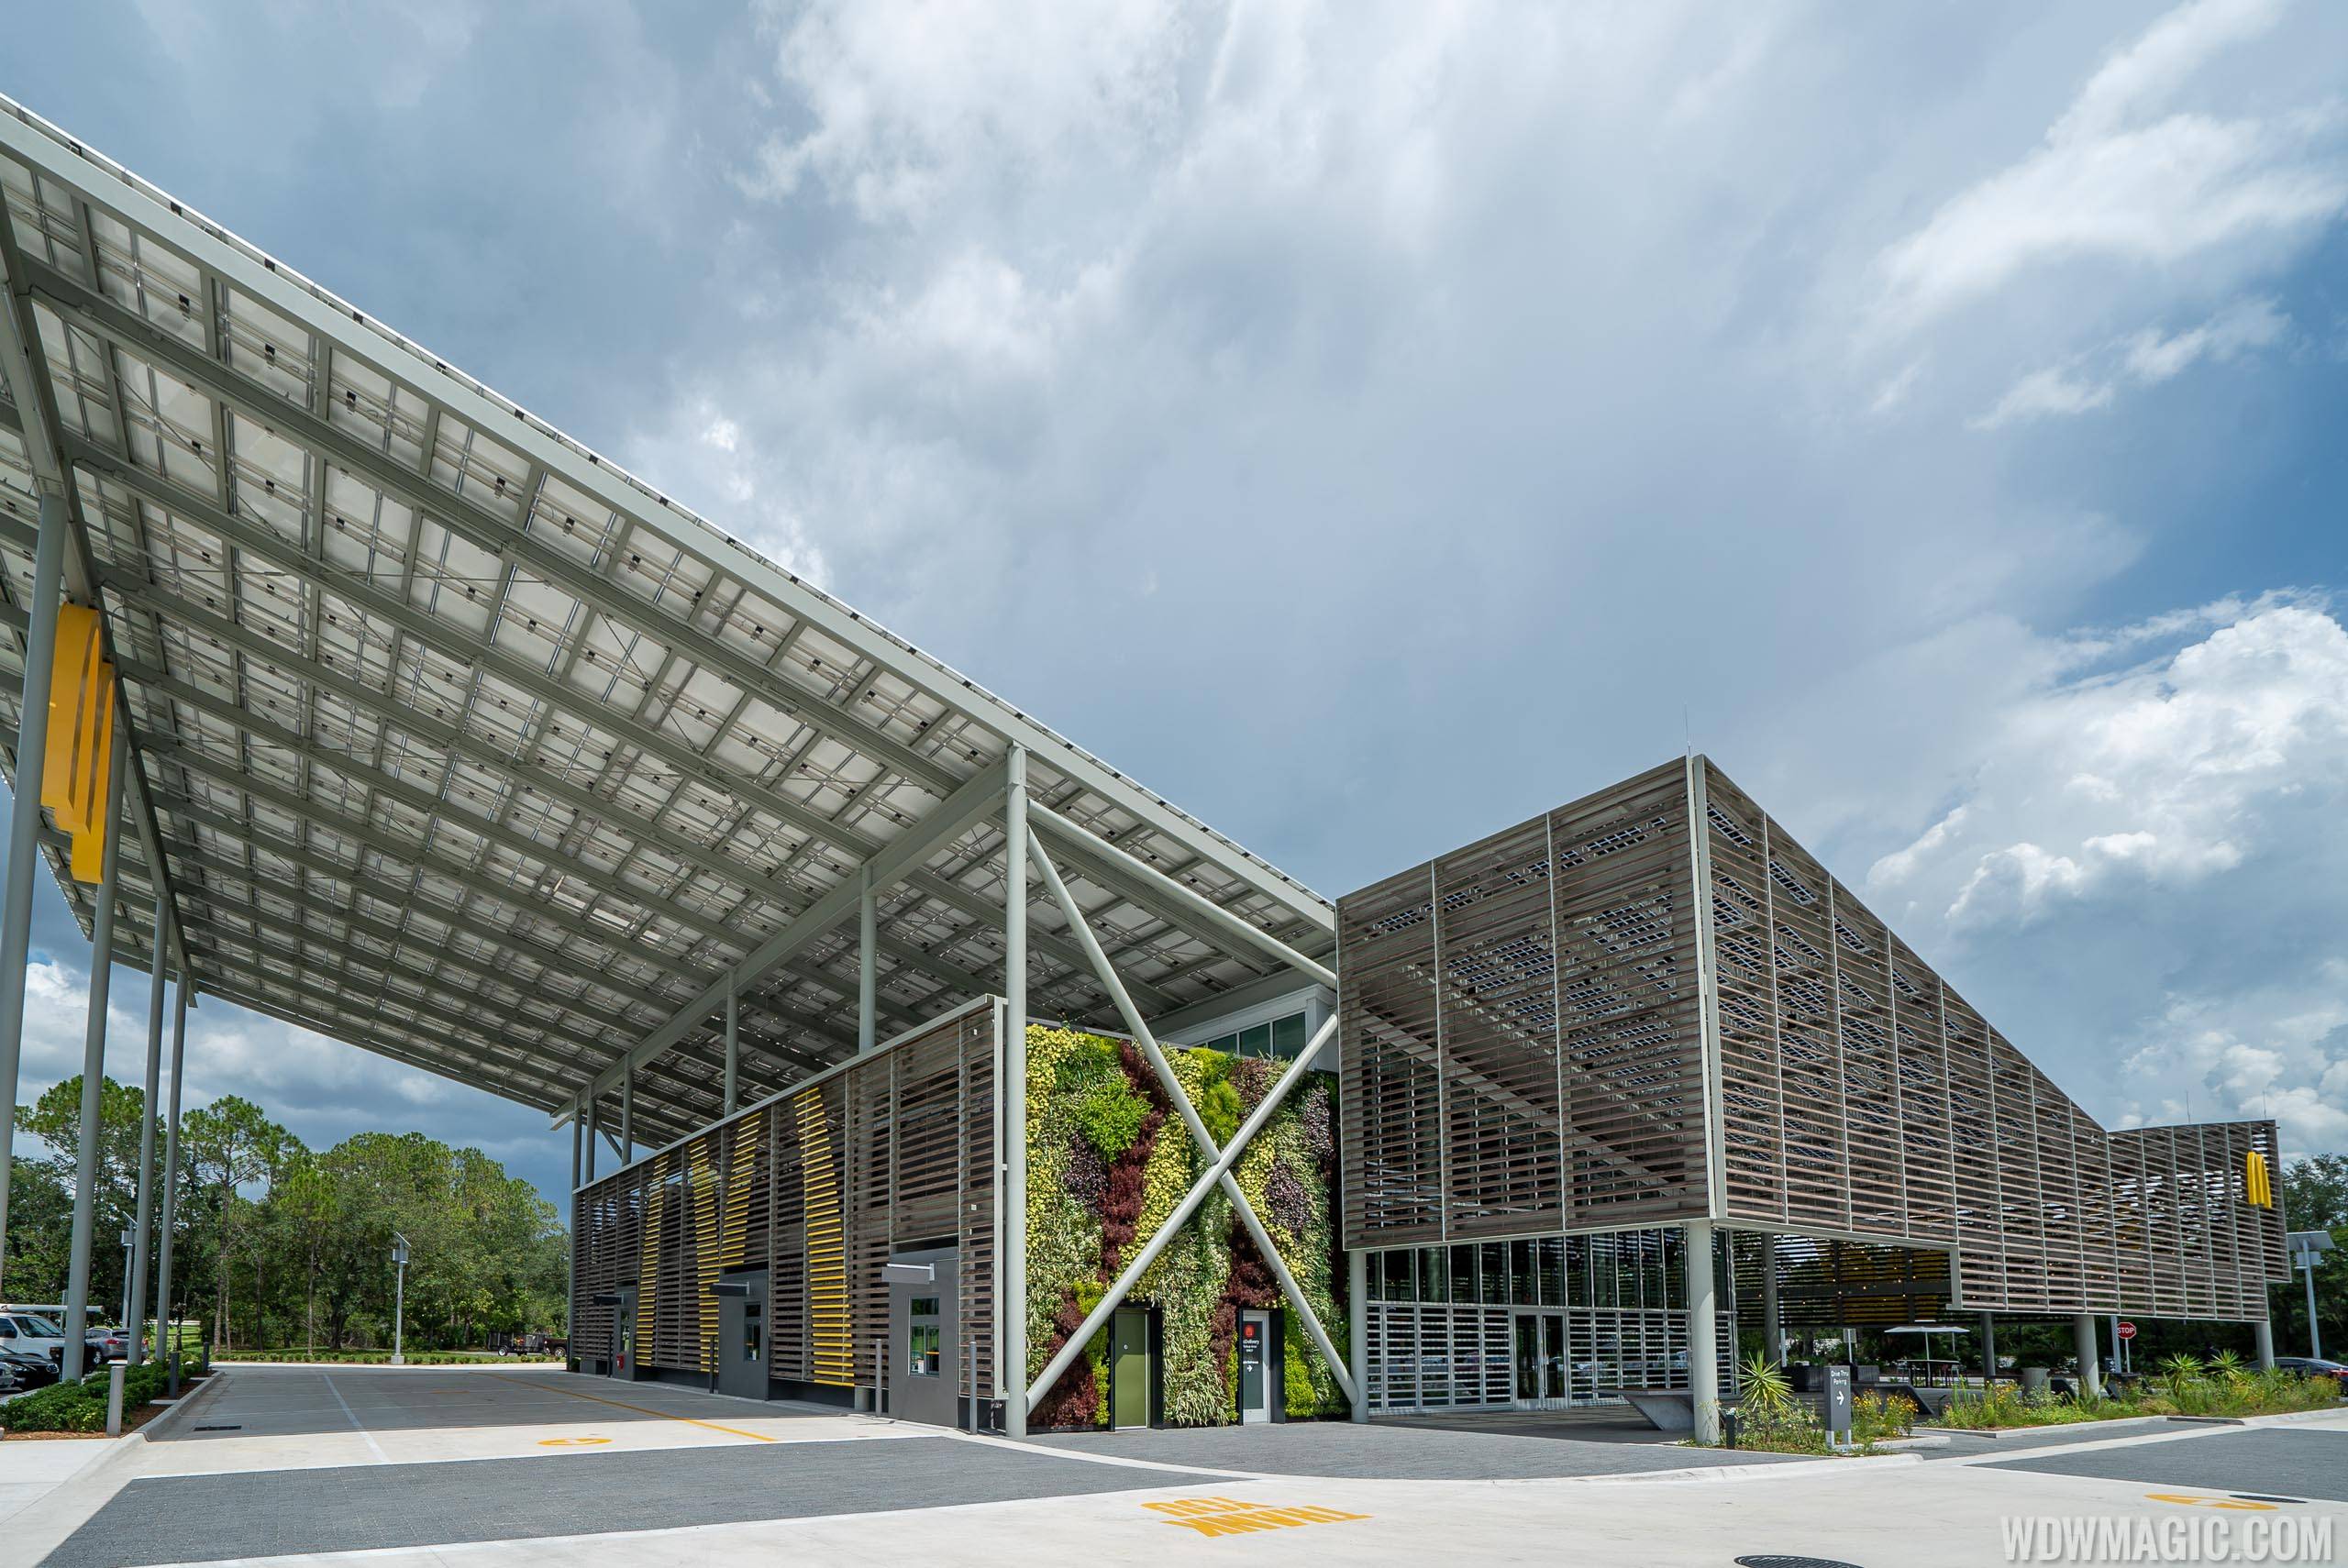 The wing-shaped structure is covered in solar panels